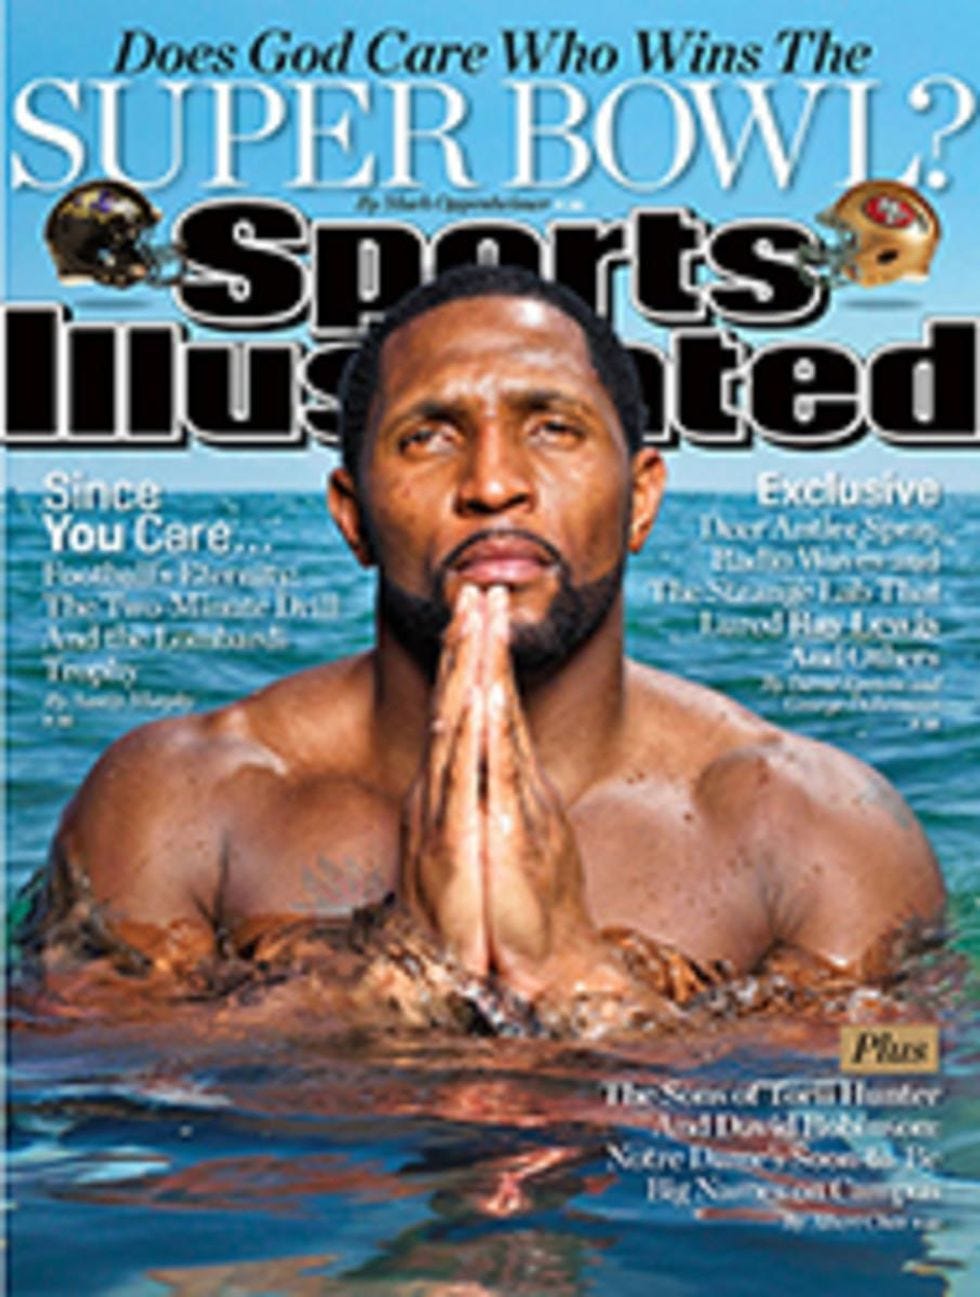 Sports illustrated cover, man in ocean praying.